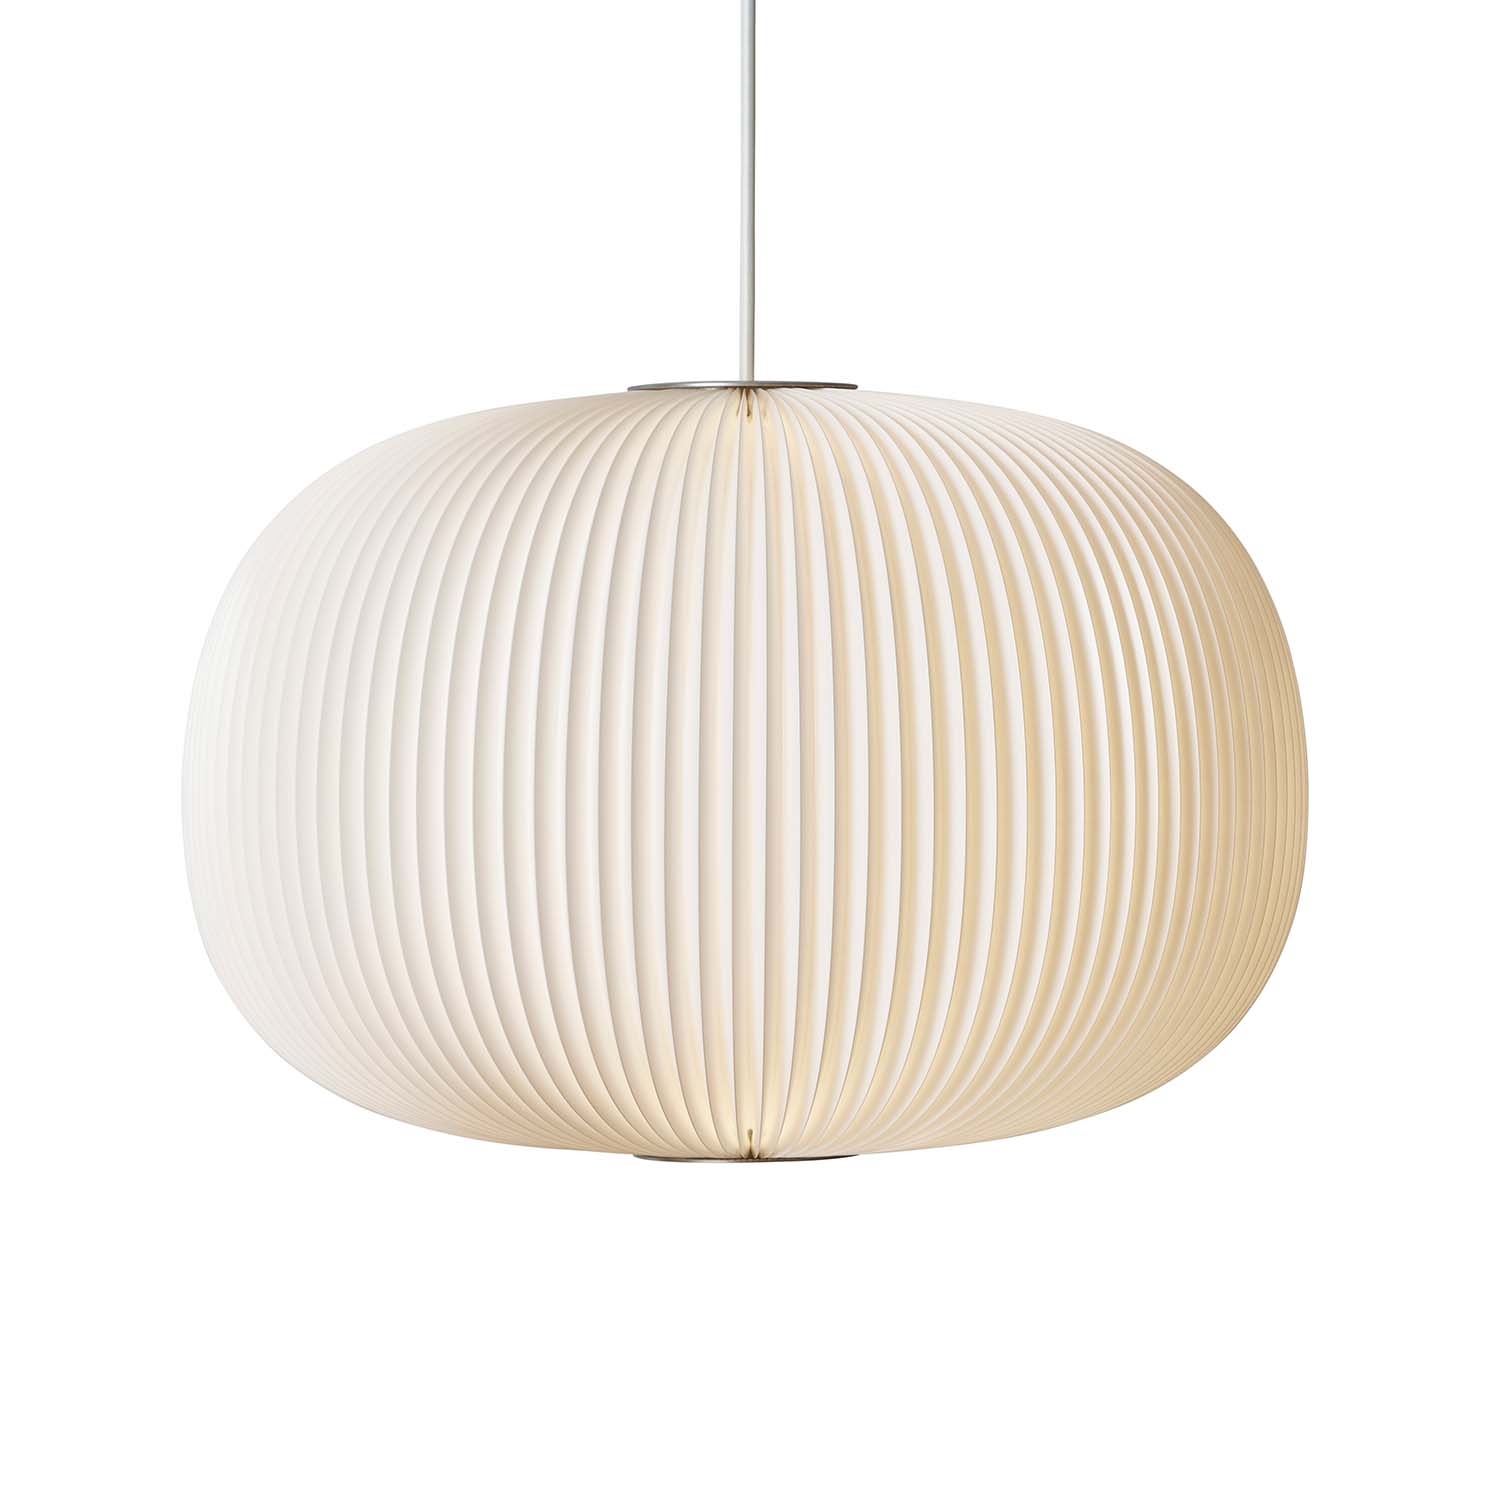 LAMELLA 1 - Pendant light made by hand in white pleated paper